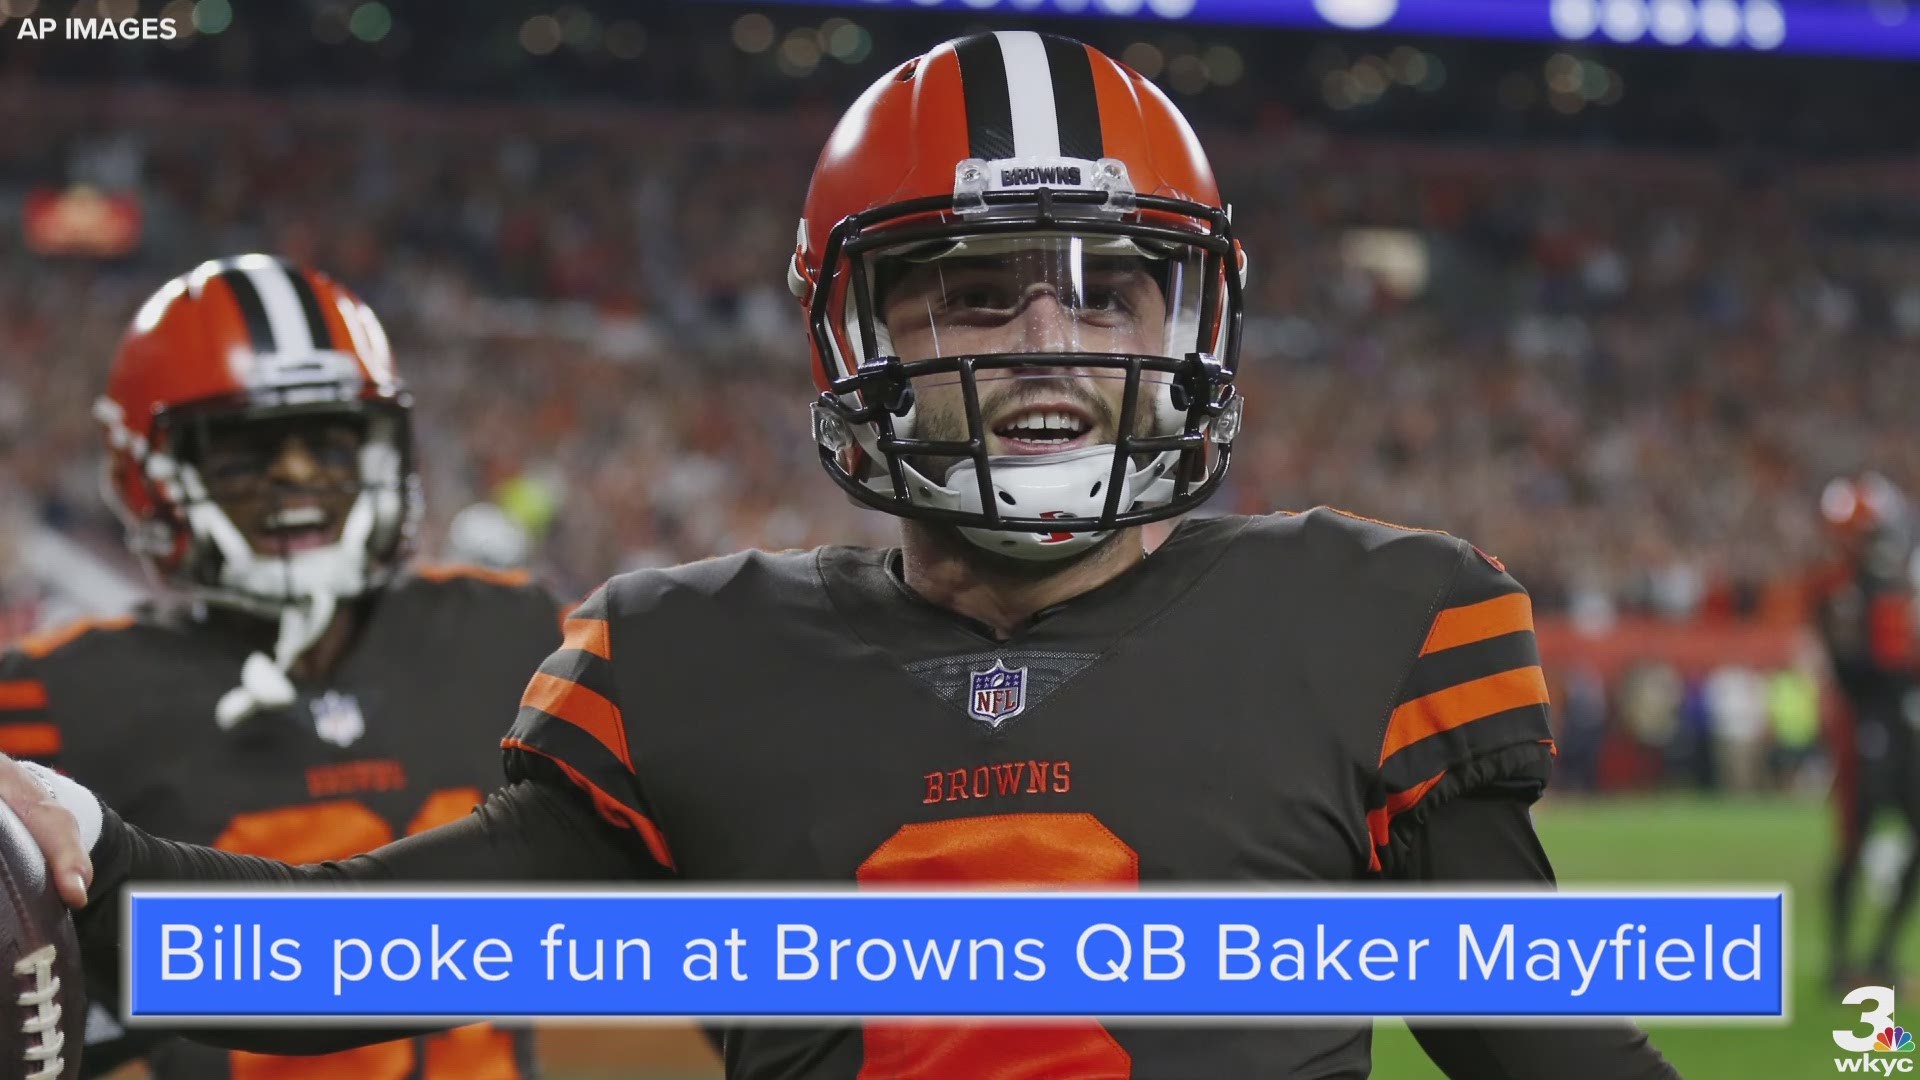 The Buffalo Bills poked fun at Cleveland Browns quarterback Baker Mayfield and their other opponents in their 2019 schedule release video.